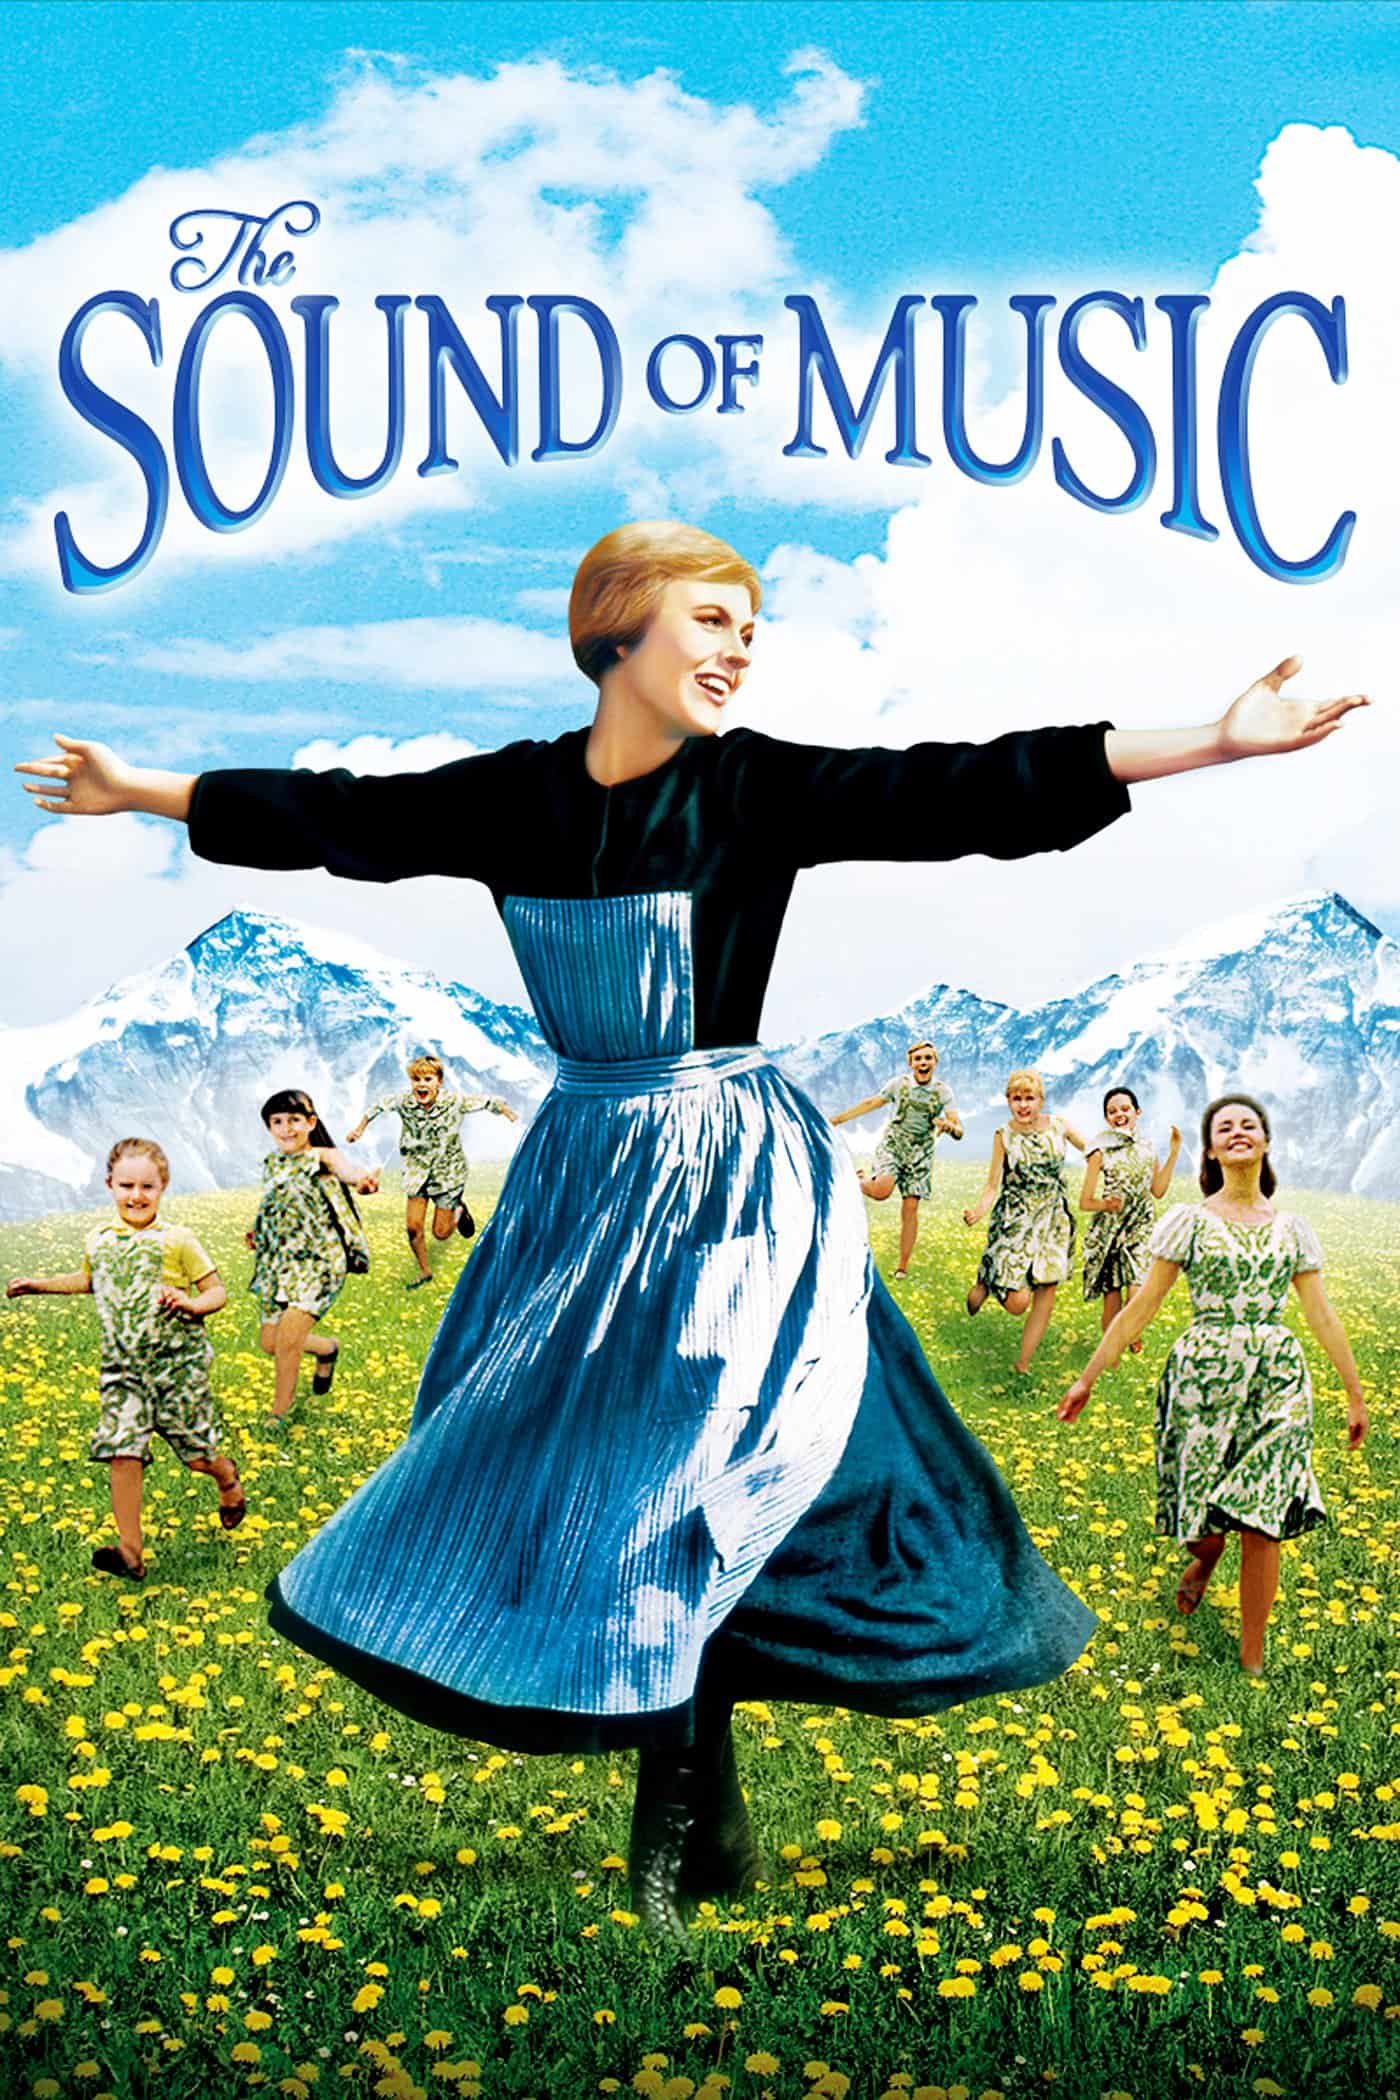 The Sound of Music, 1965 